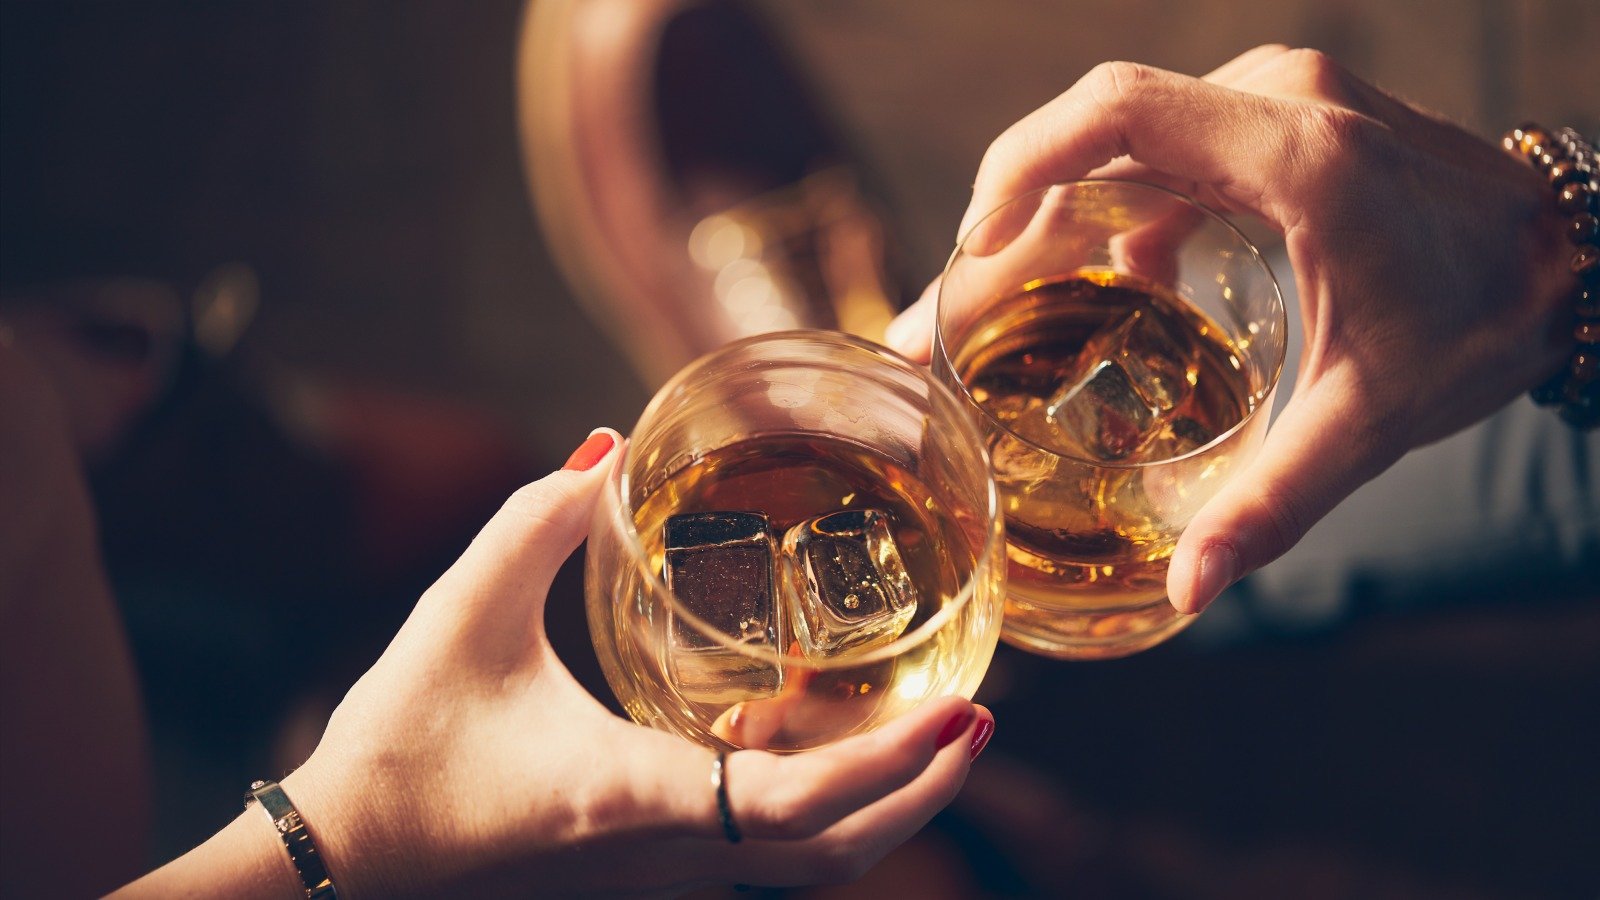 Here's What Happens When You Drink Scotch Every Day